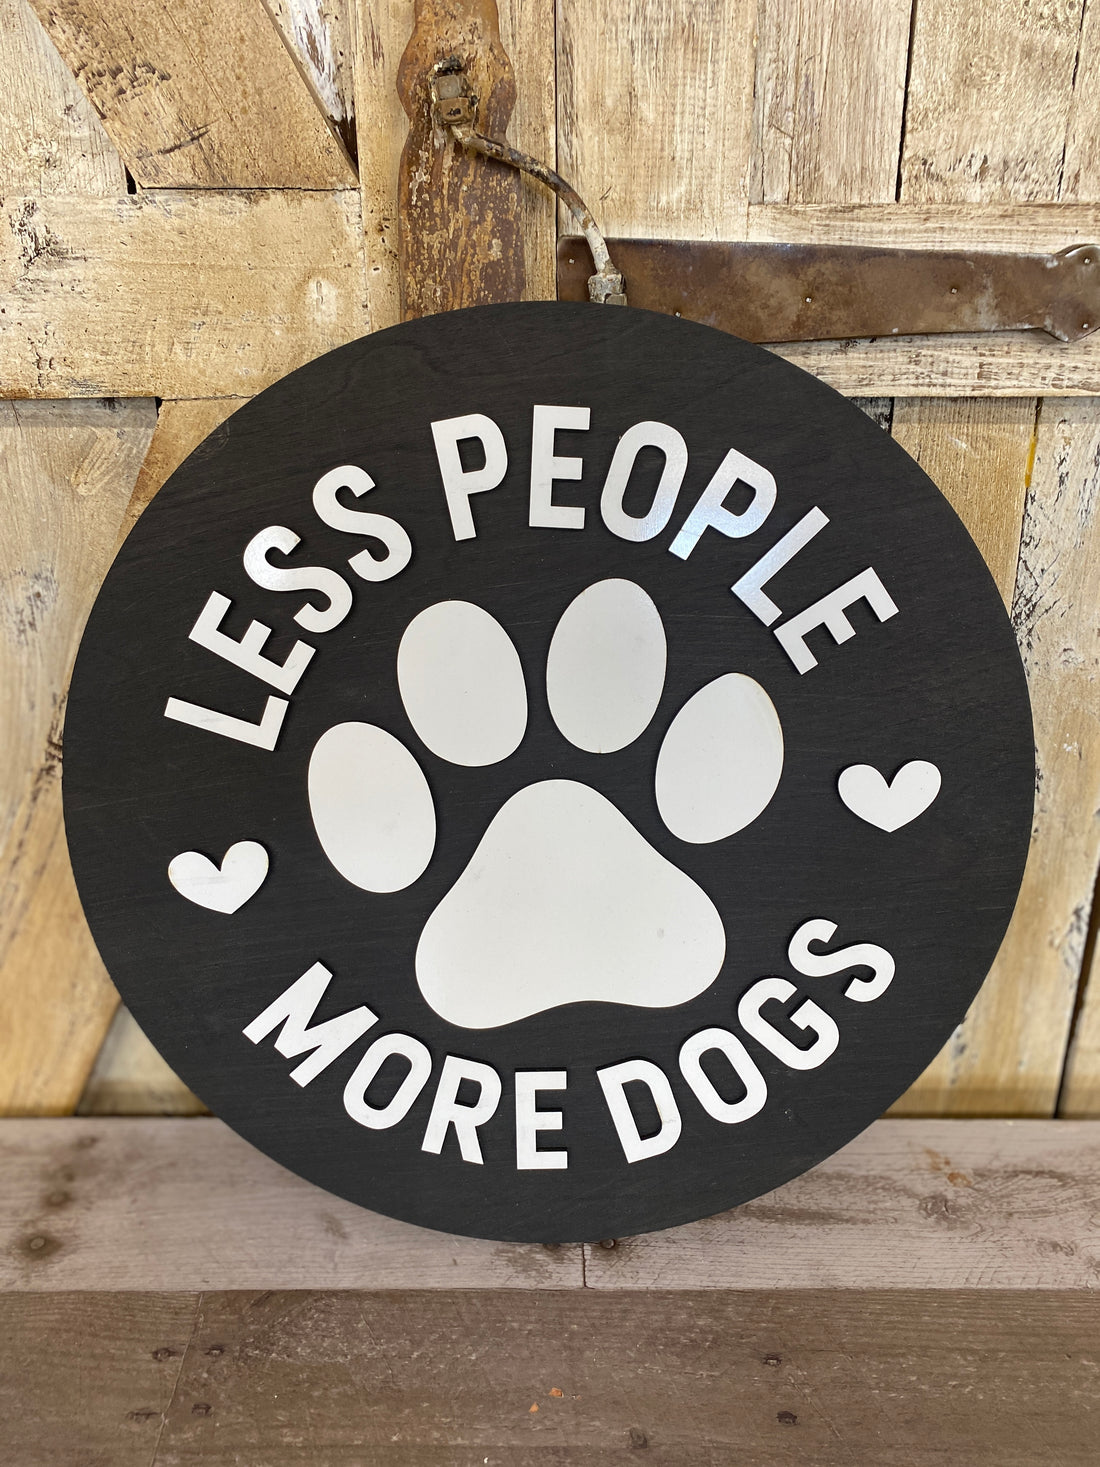 Less People, More Dogs Sign